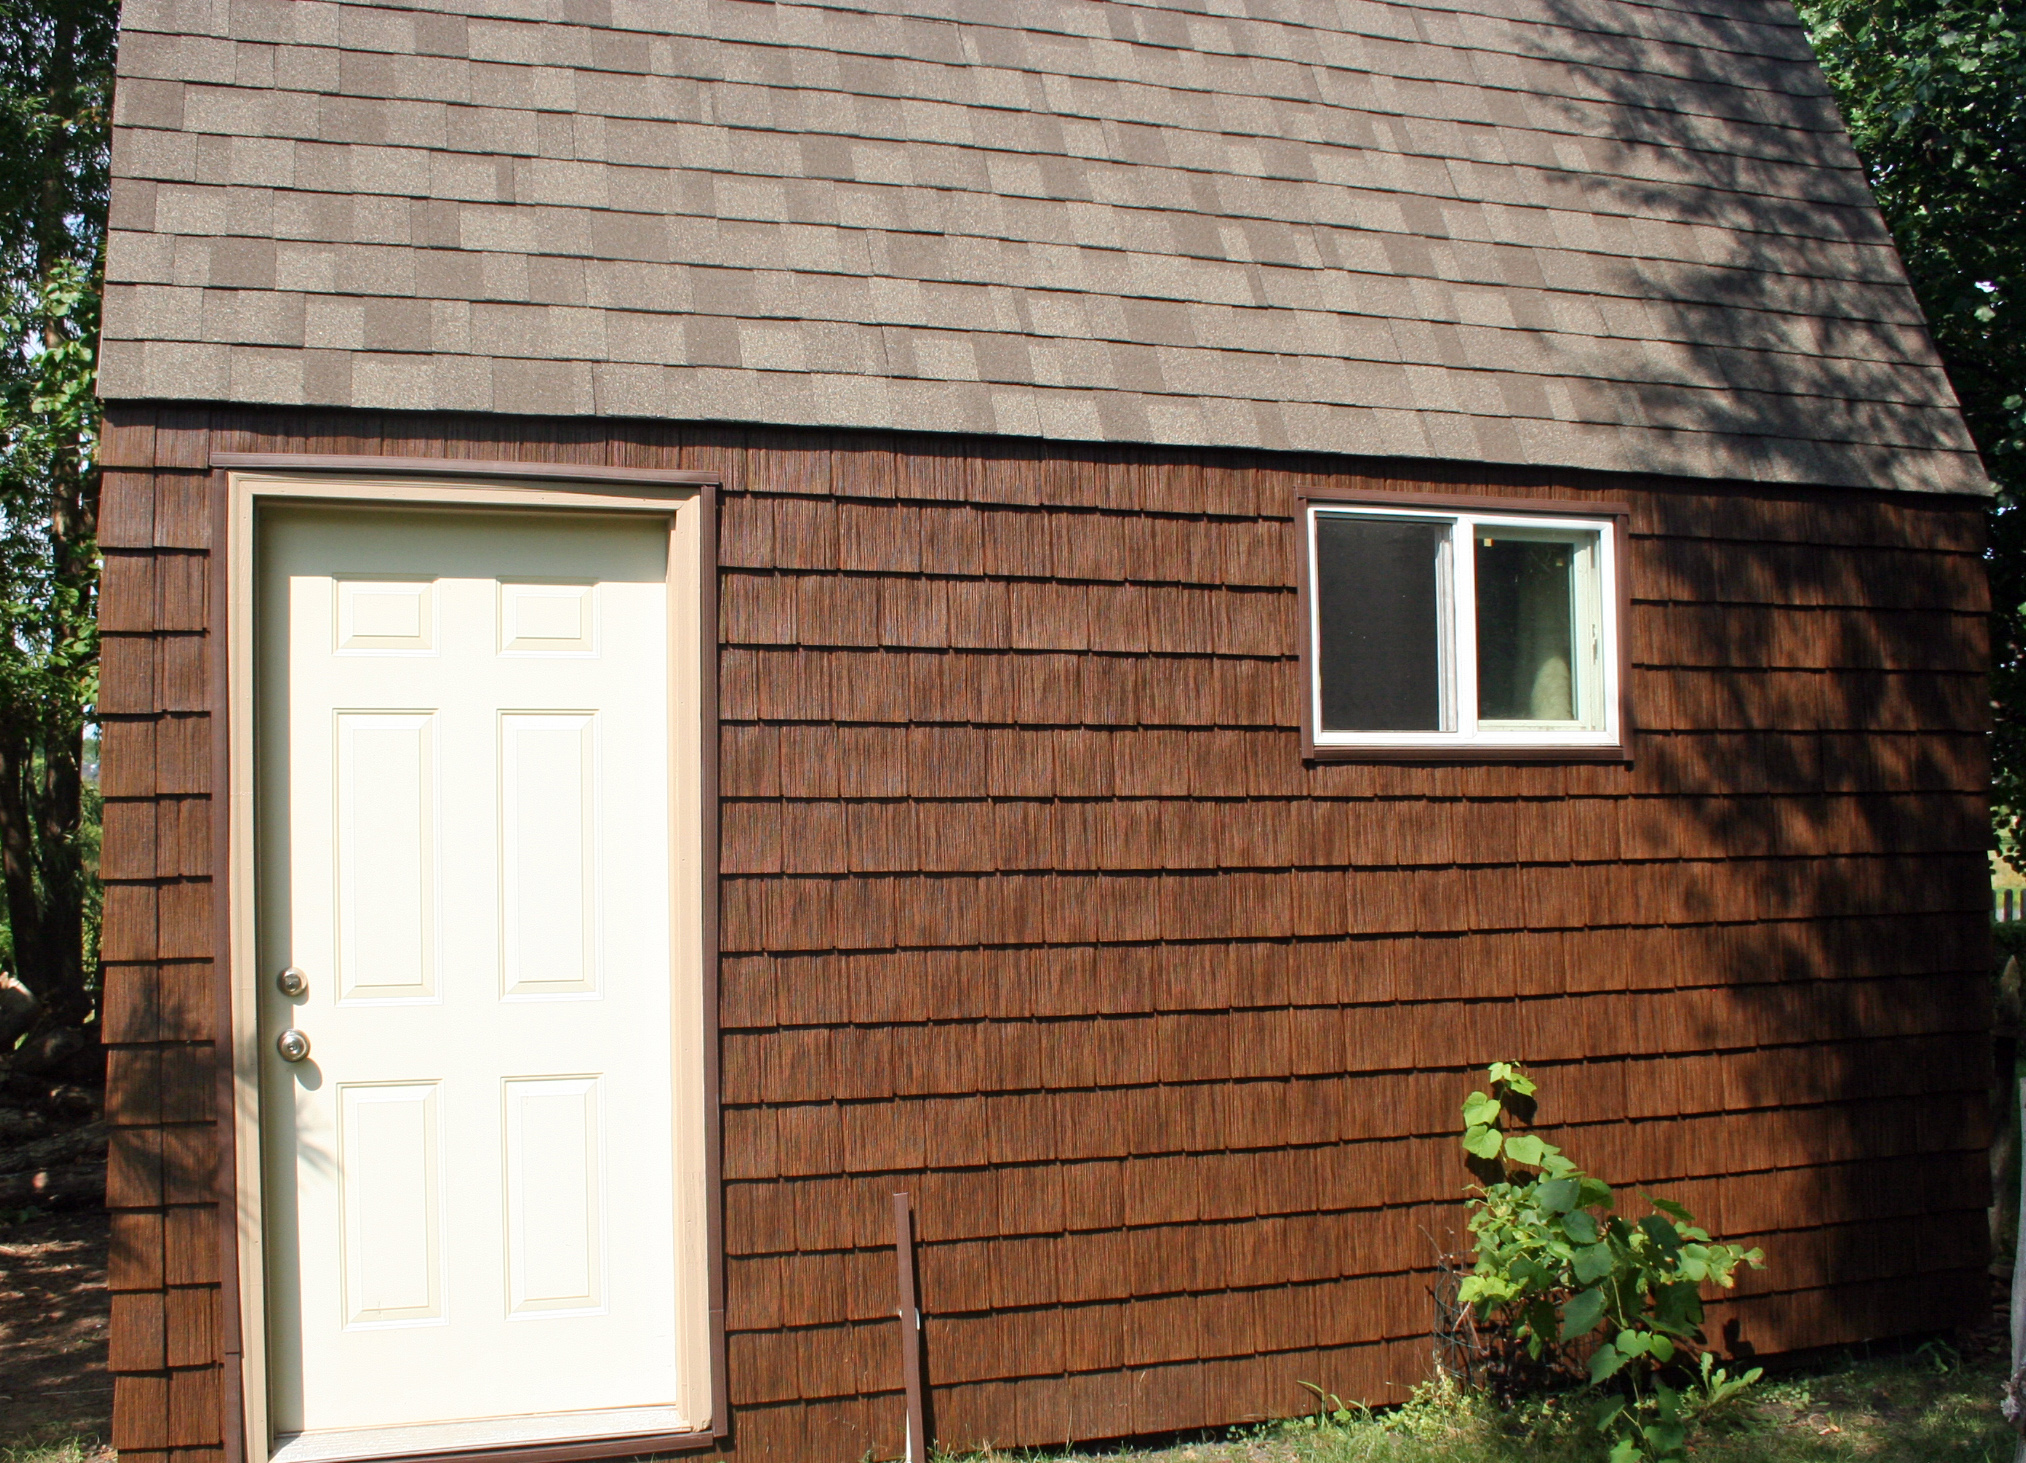 In addition to covering foundations, NovikShake can adorn barns, sheds and the dead space under decks and porches.